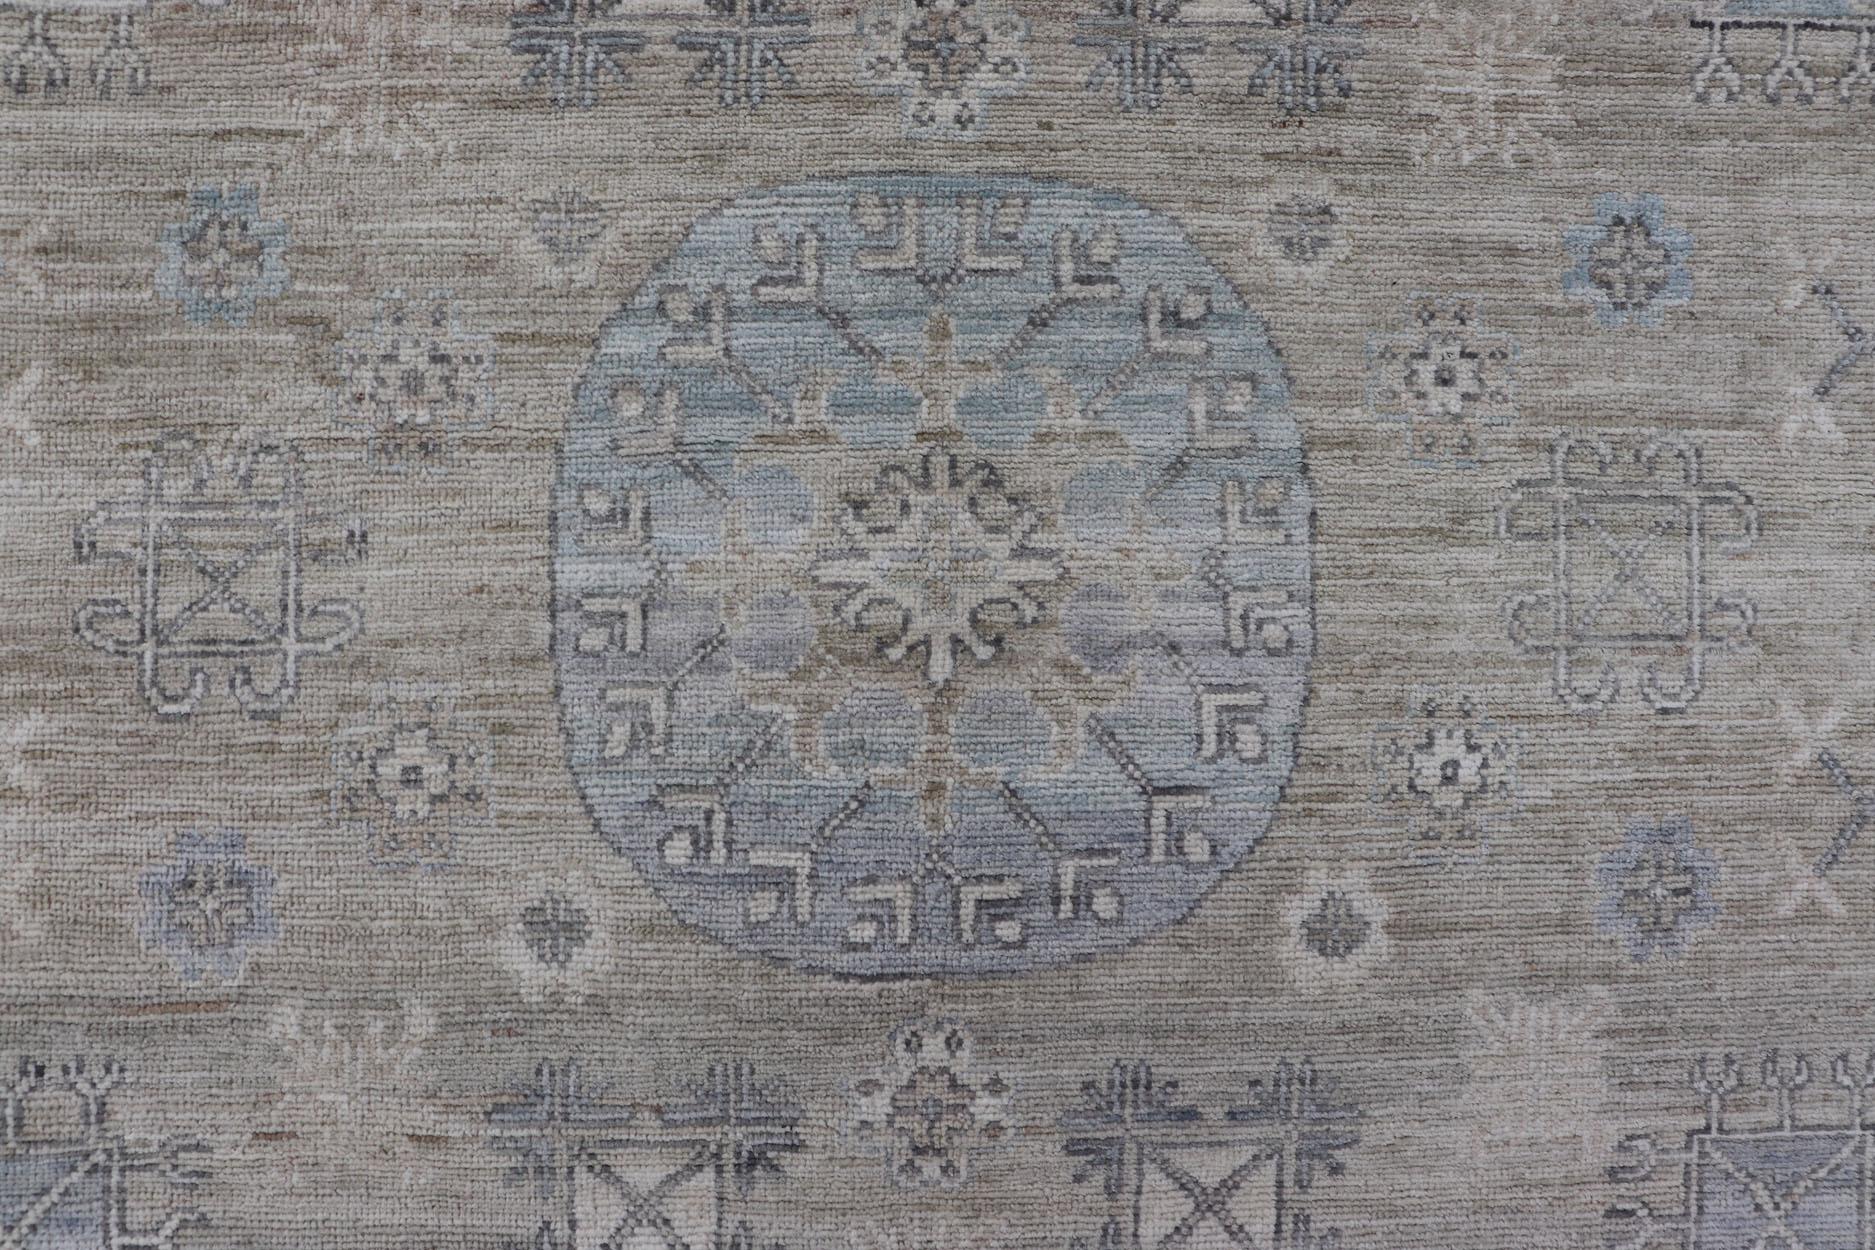 Measures: 6'0 x 9'1 
Khotan Design Rug with Circular Medallion in Light Green, Light Blue, and Cream. Keivan Woven Arts, rug/AWR-12172 country of origin / type: Afghanistan / Khotan.
This Khotan features a geometric all-over design flanked by a